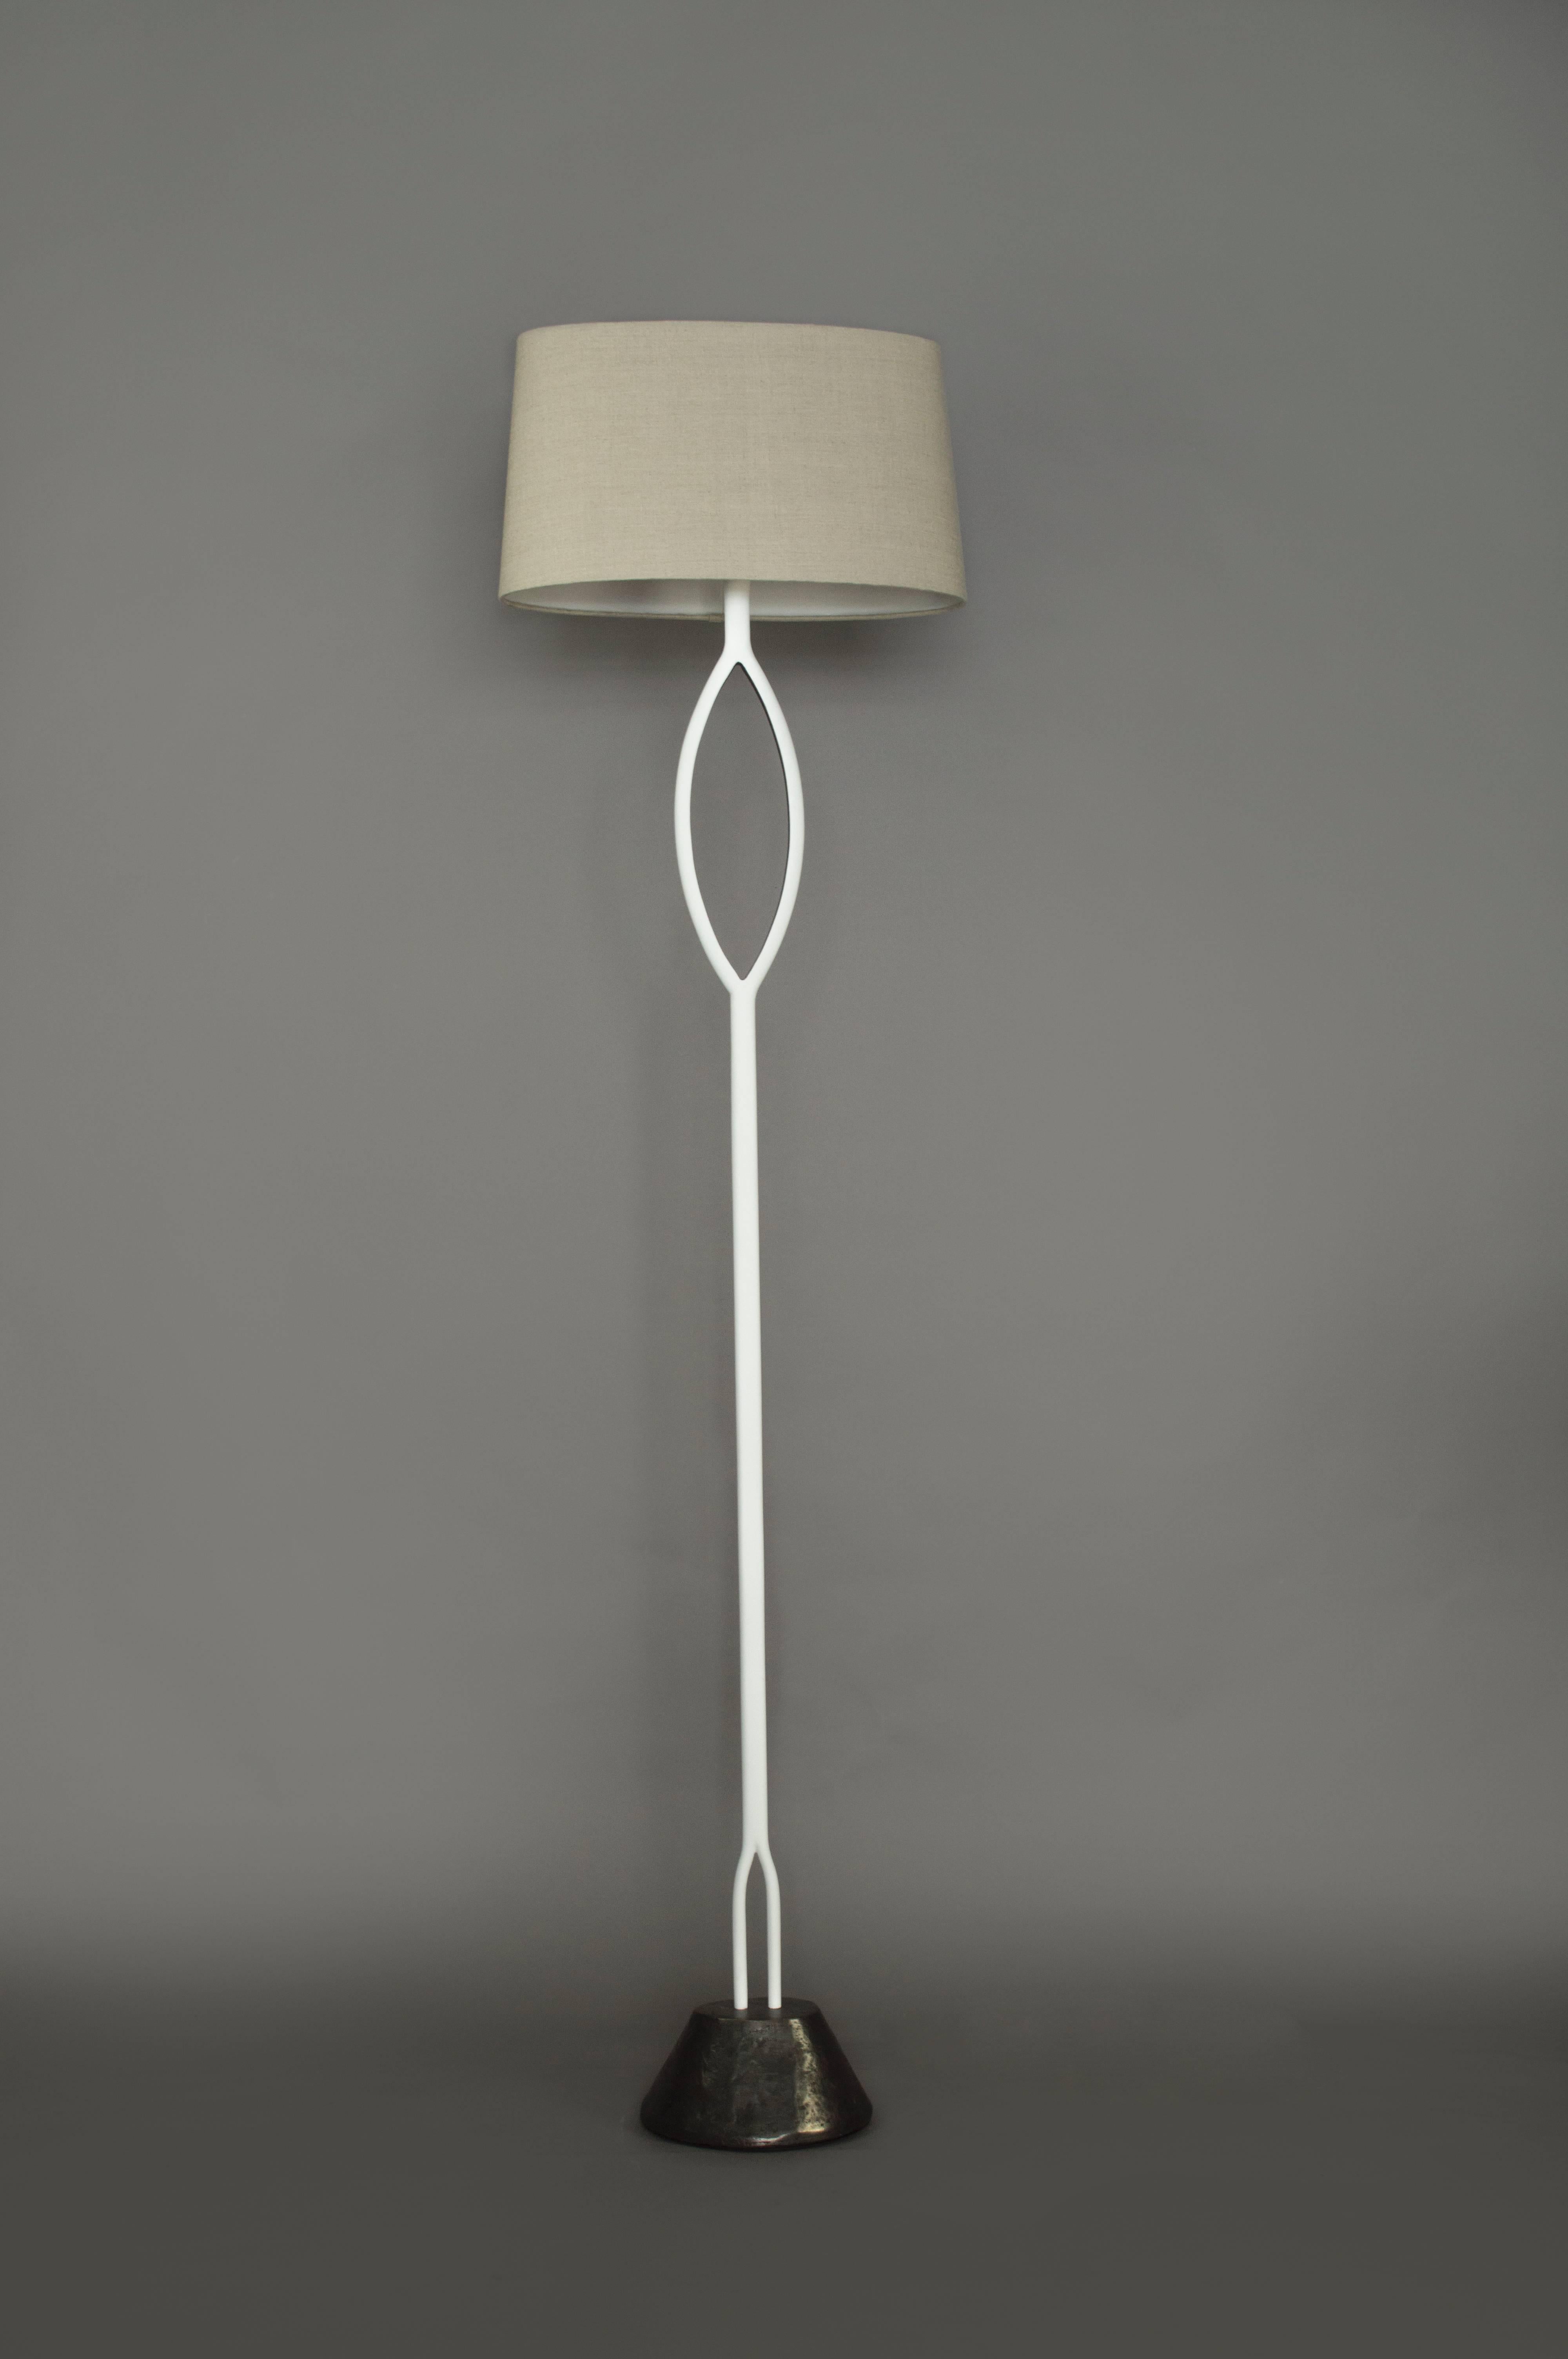 A slender floor lamp handcrafted in plaster. A cast bronze base and a linen shade complete the light. The light has one medium based bulb with a three-way socket.